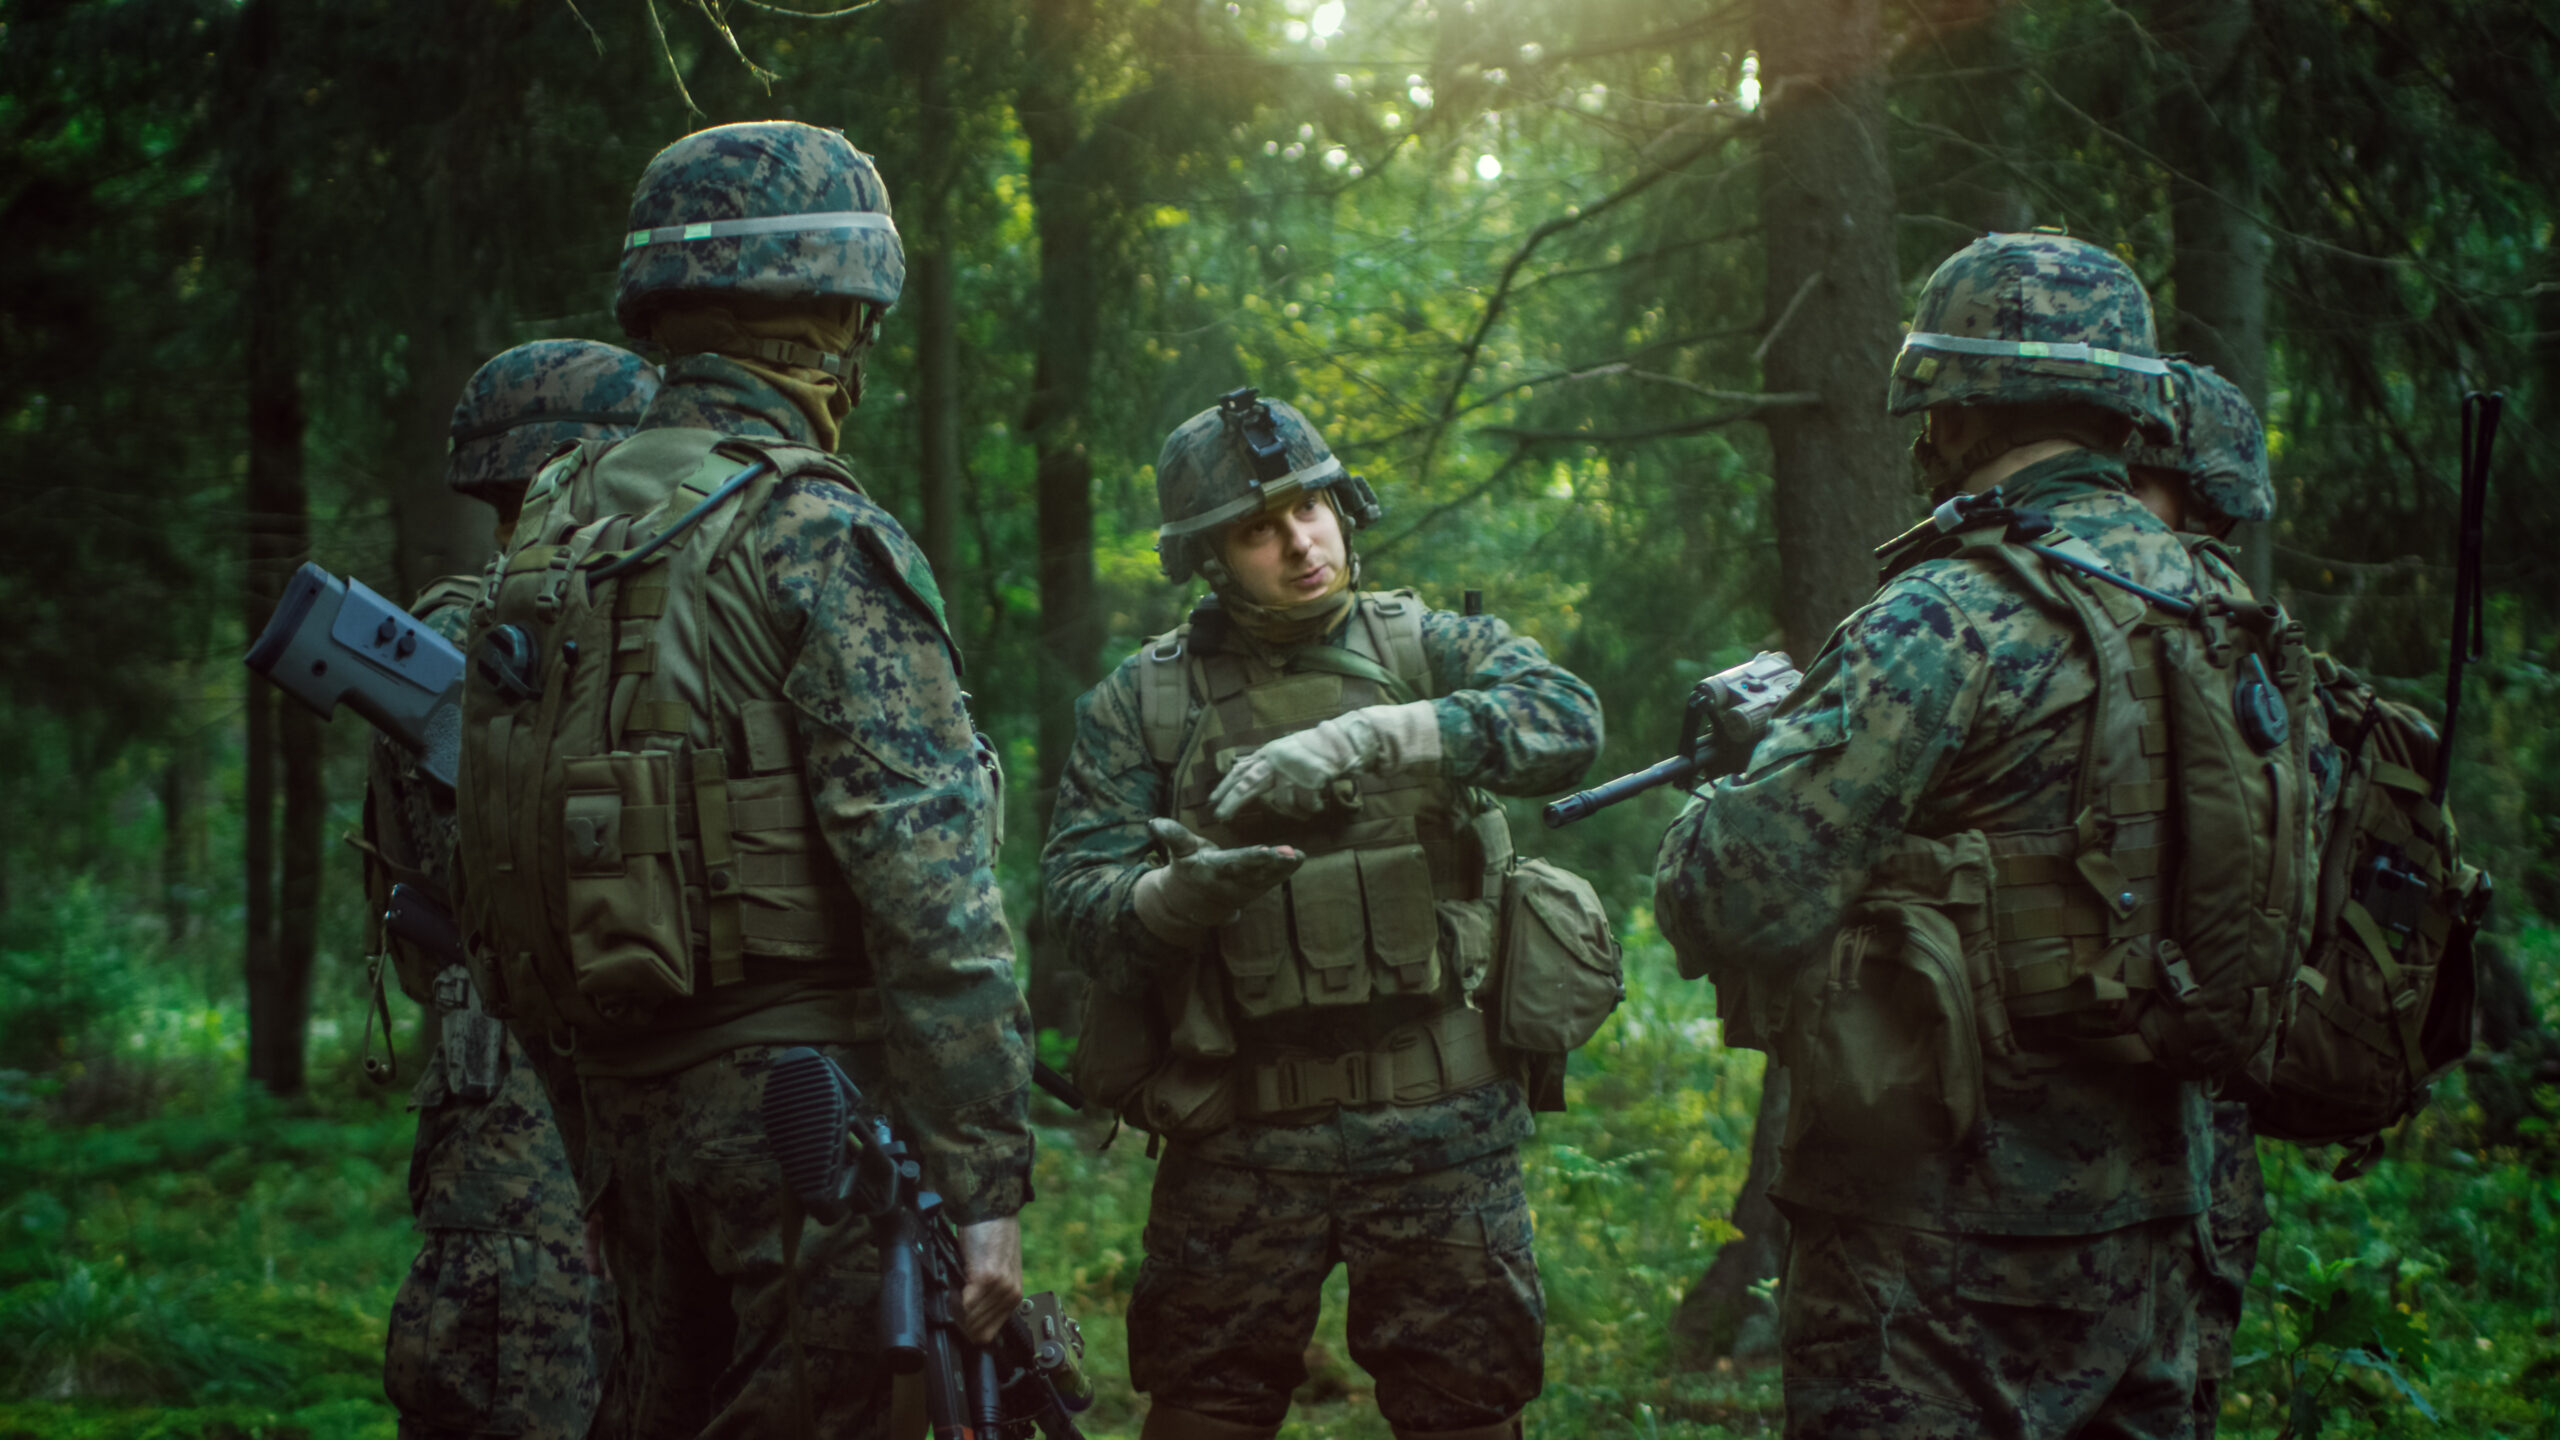 <p>It’s common knowledge that military service members often face extremely stressful situations. “We train low, we fight high” serves as a reminder that their intense training will pay off in real-world scenarios.</p>